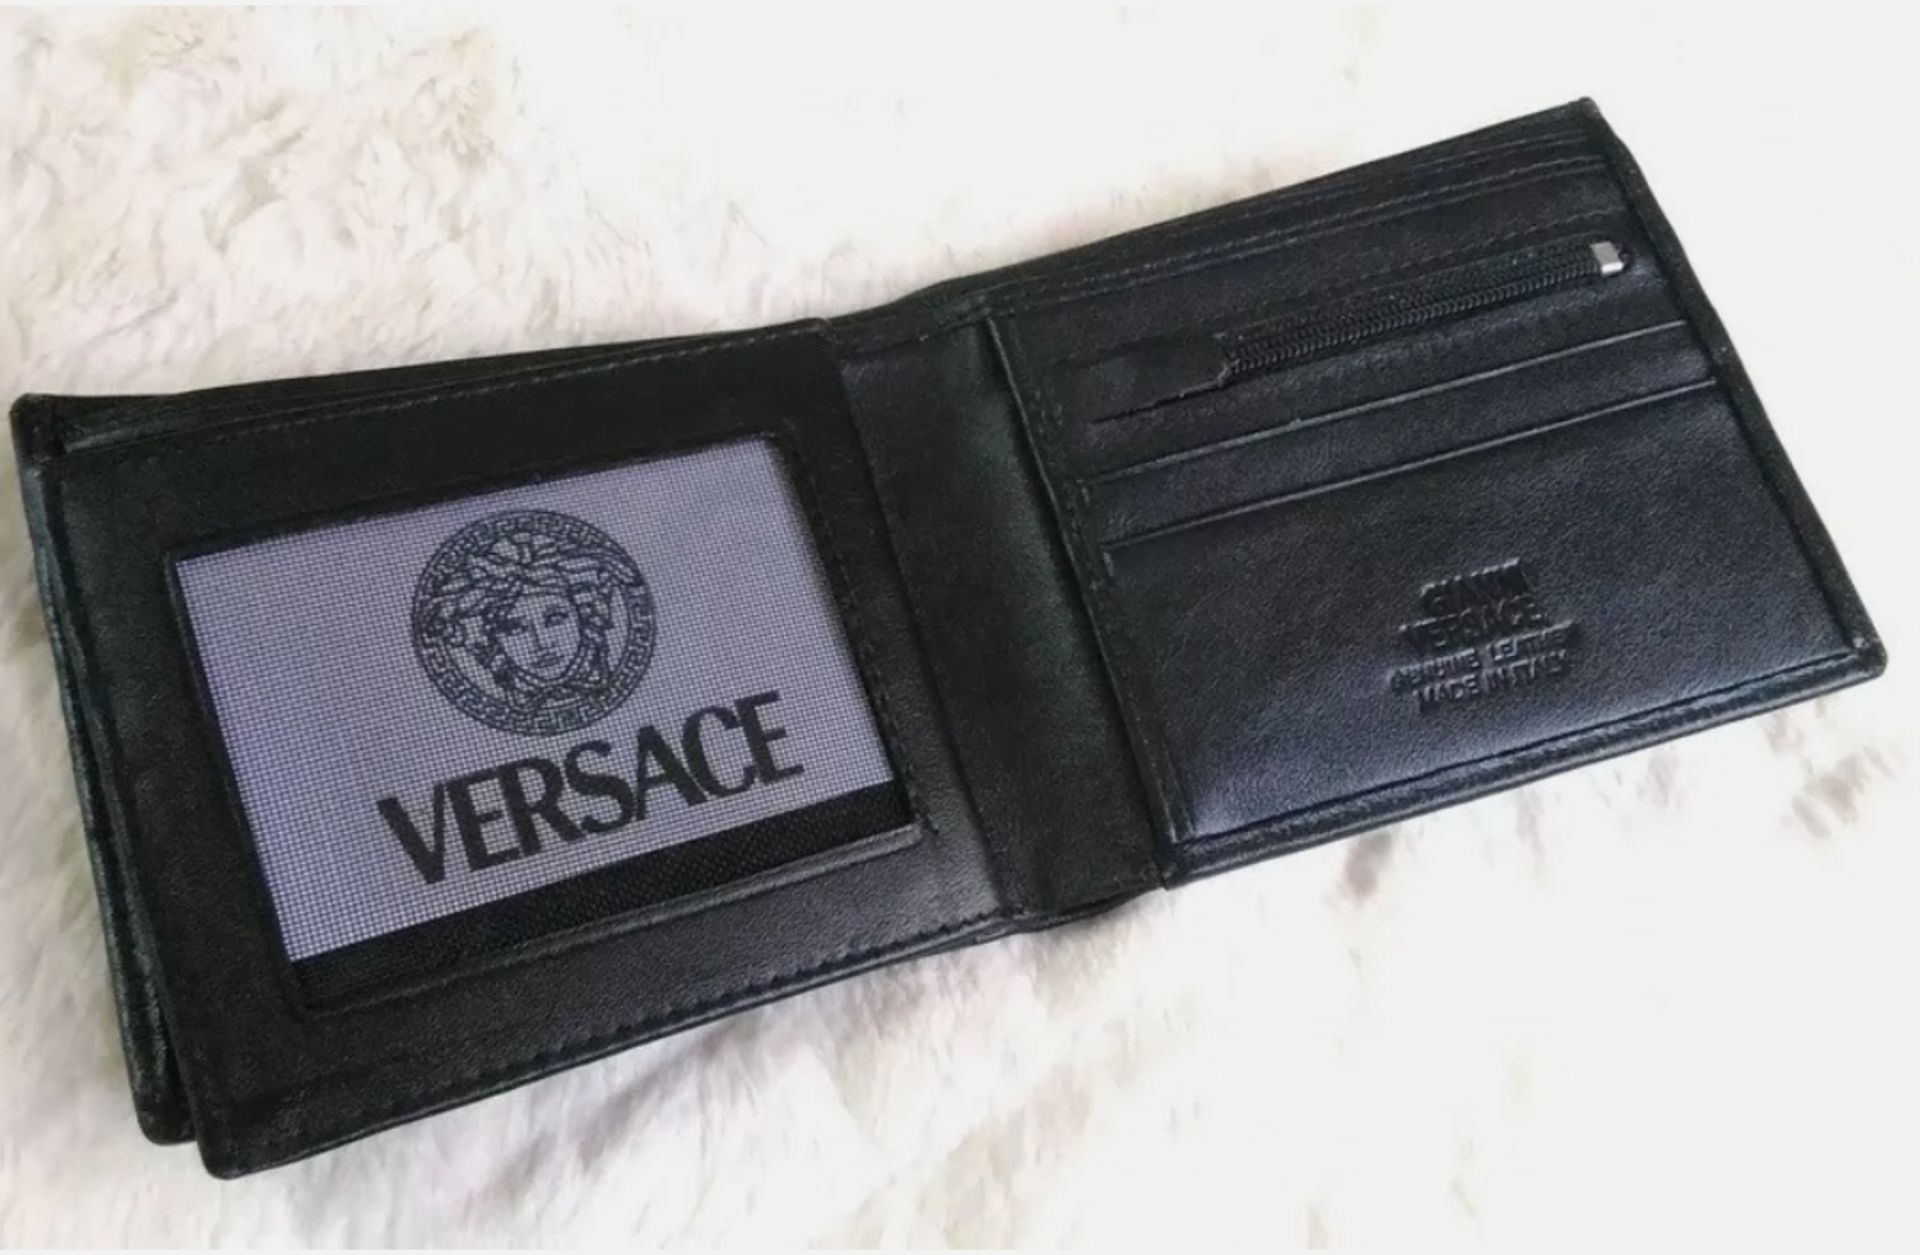 versace men's leather wallet - new with box - Image 6 of 7